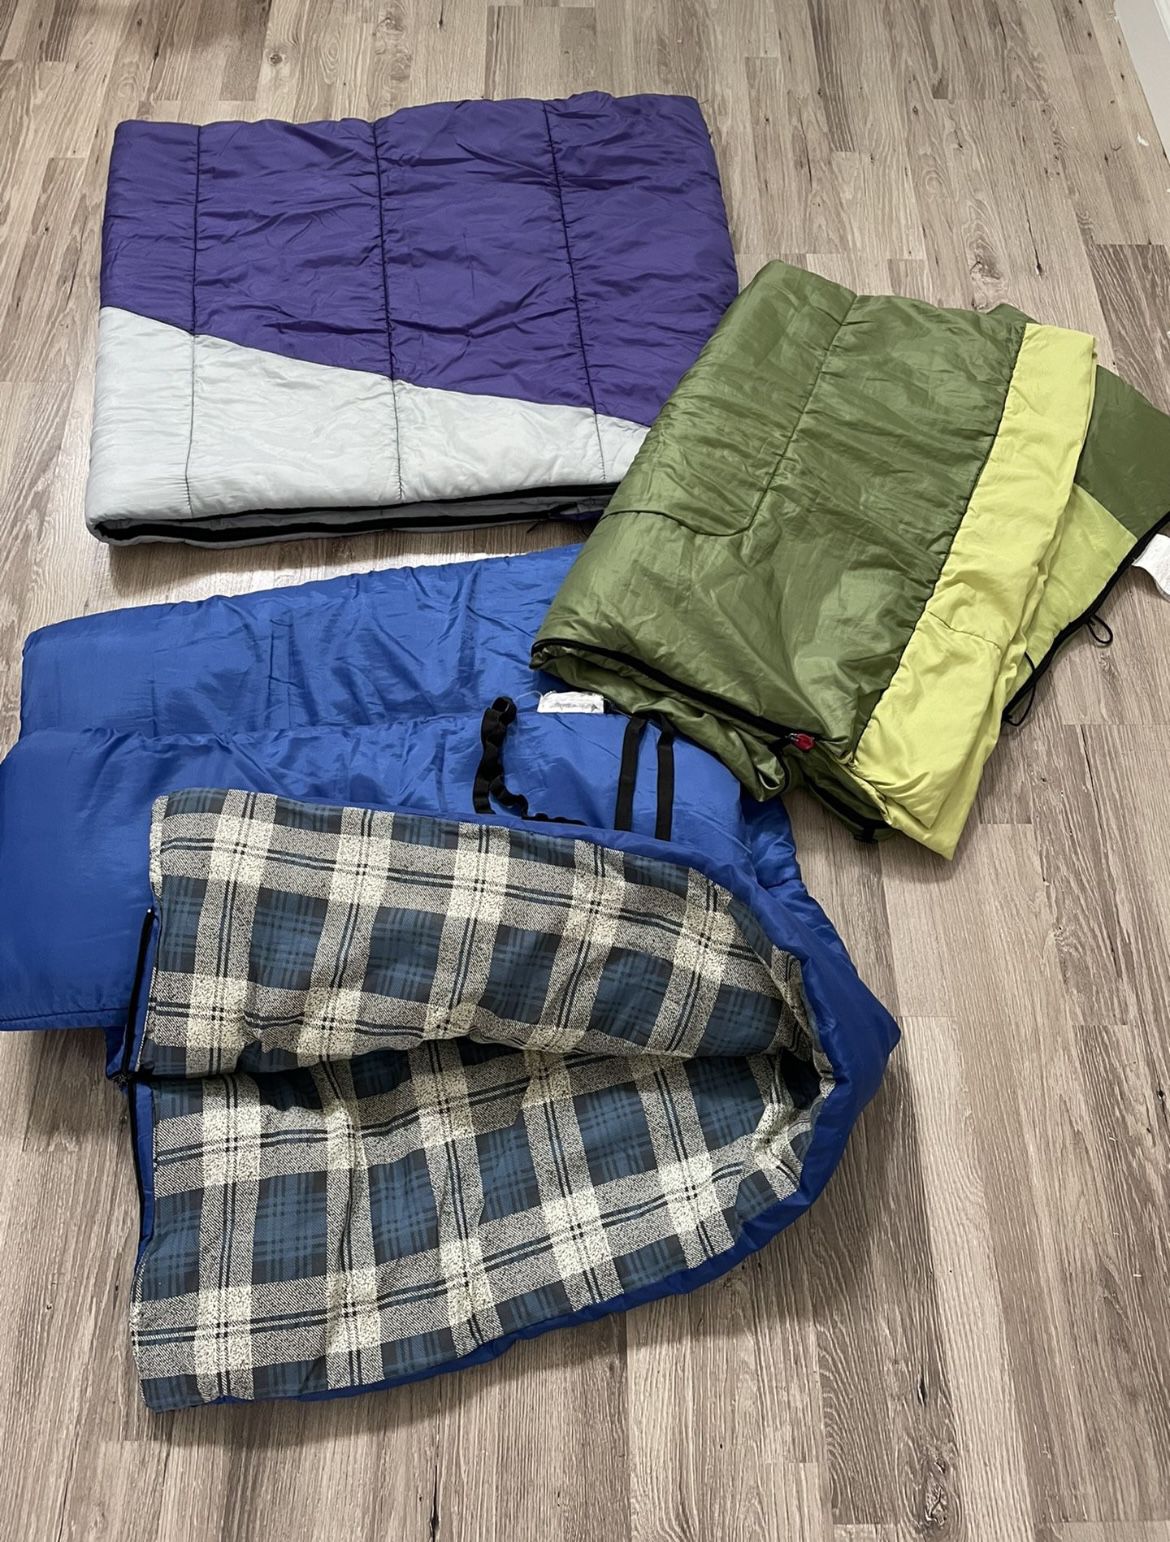 3 Camping Sleeping Bag With Great Condition 